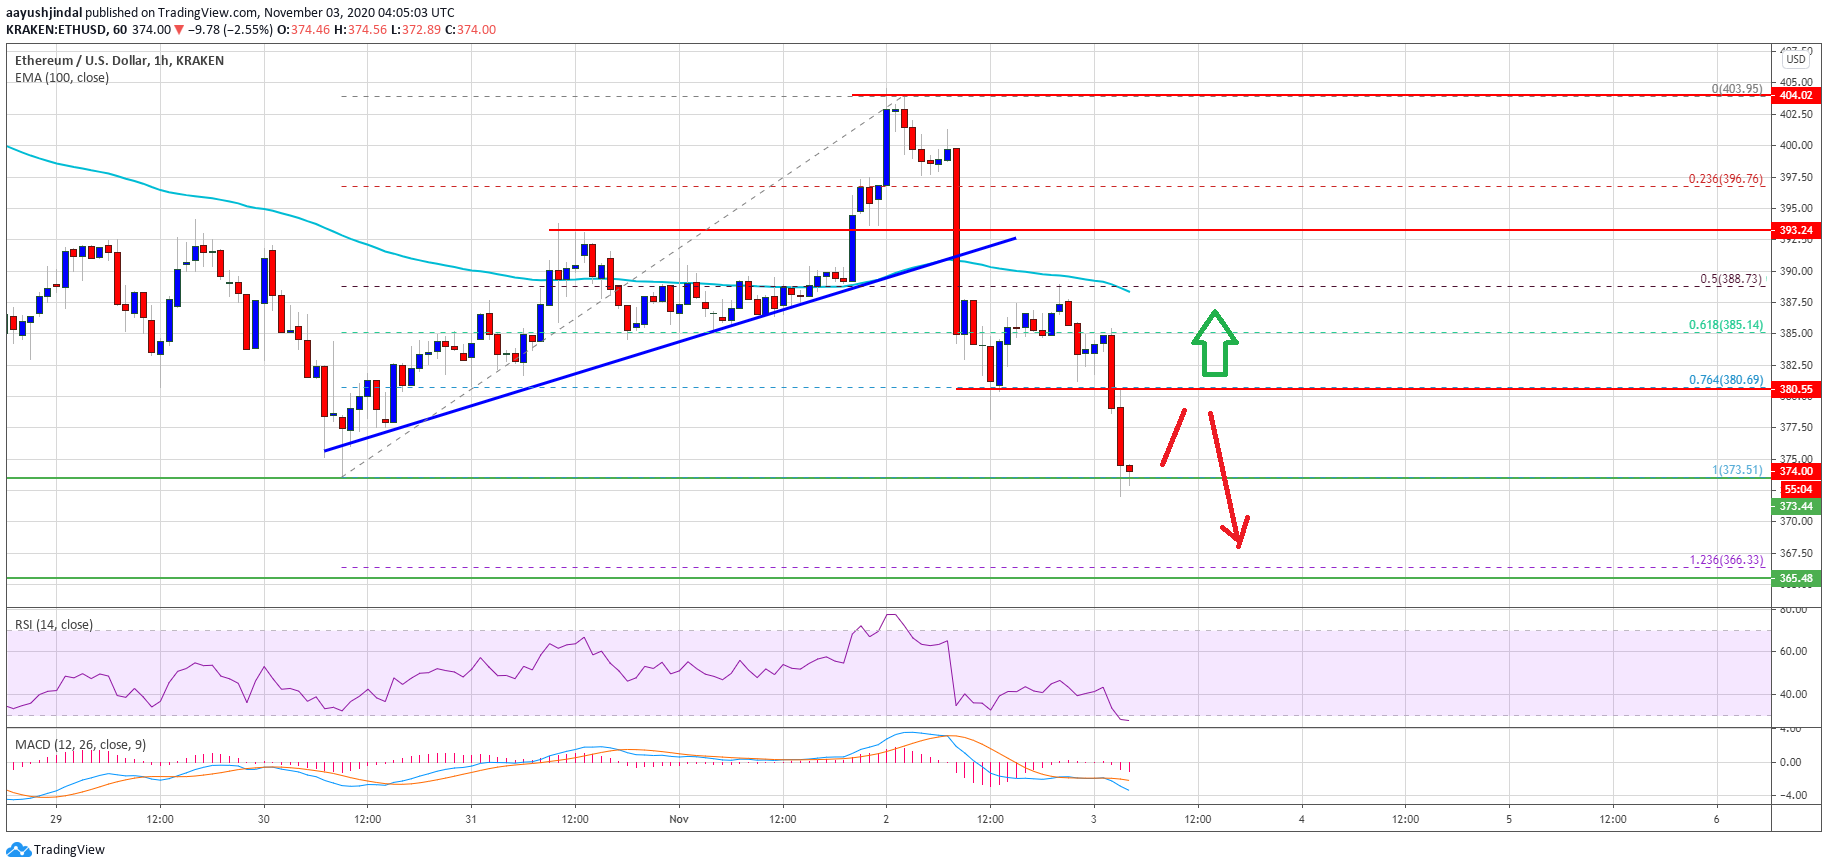 TA: Ethereum Near Make-or-Break Levels, Why There’s Risk of Sharp Decline